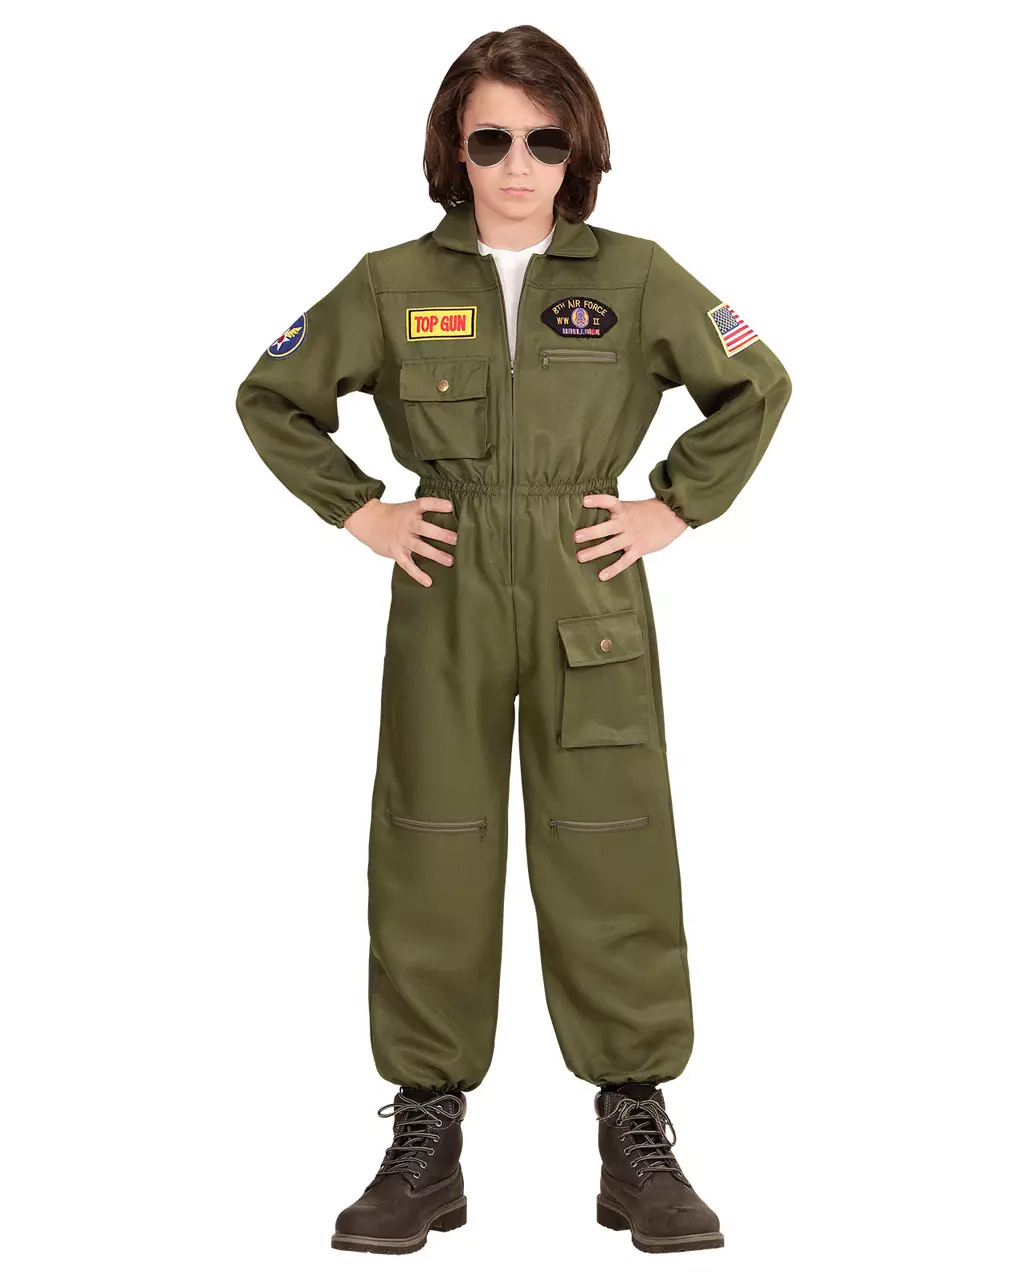 Mens Air Force Bomber Jacket Costume Military Fighter Pilot Top Gun Party  Outfit - Top Gun Costume - Occupation Costume - Themes